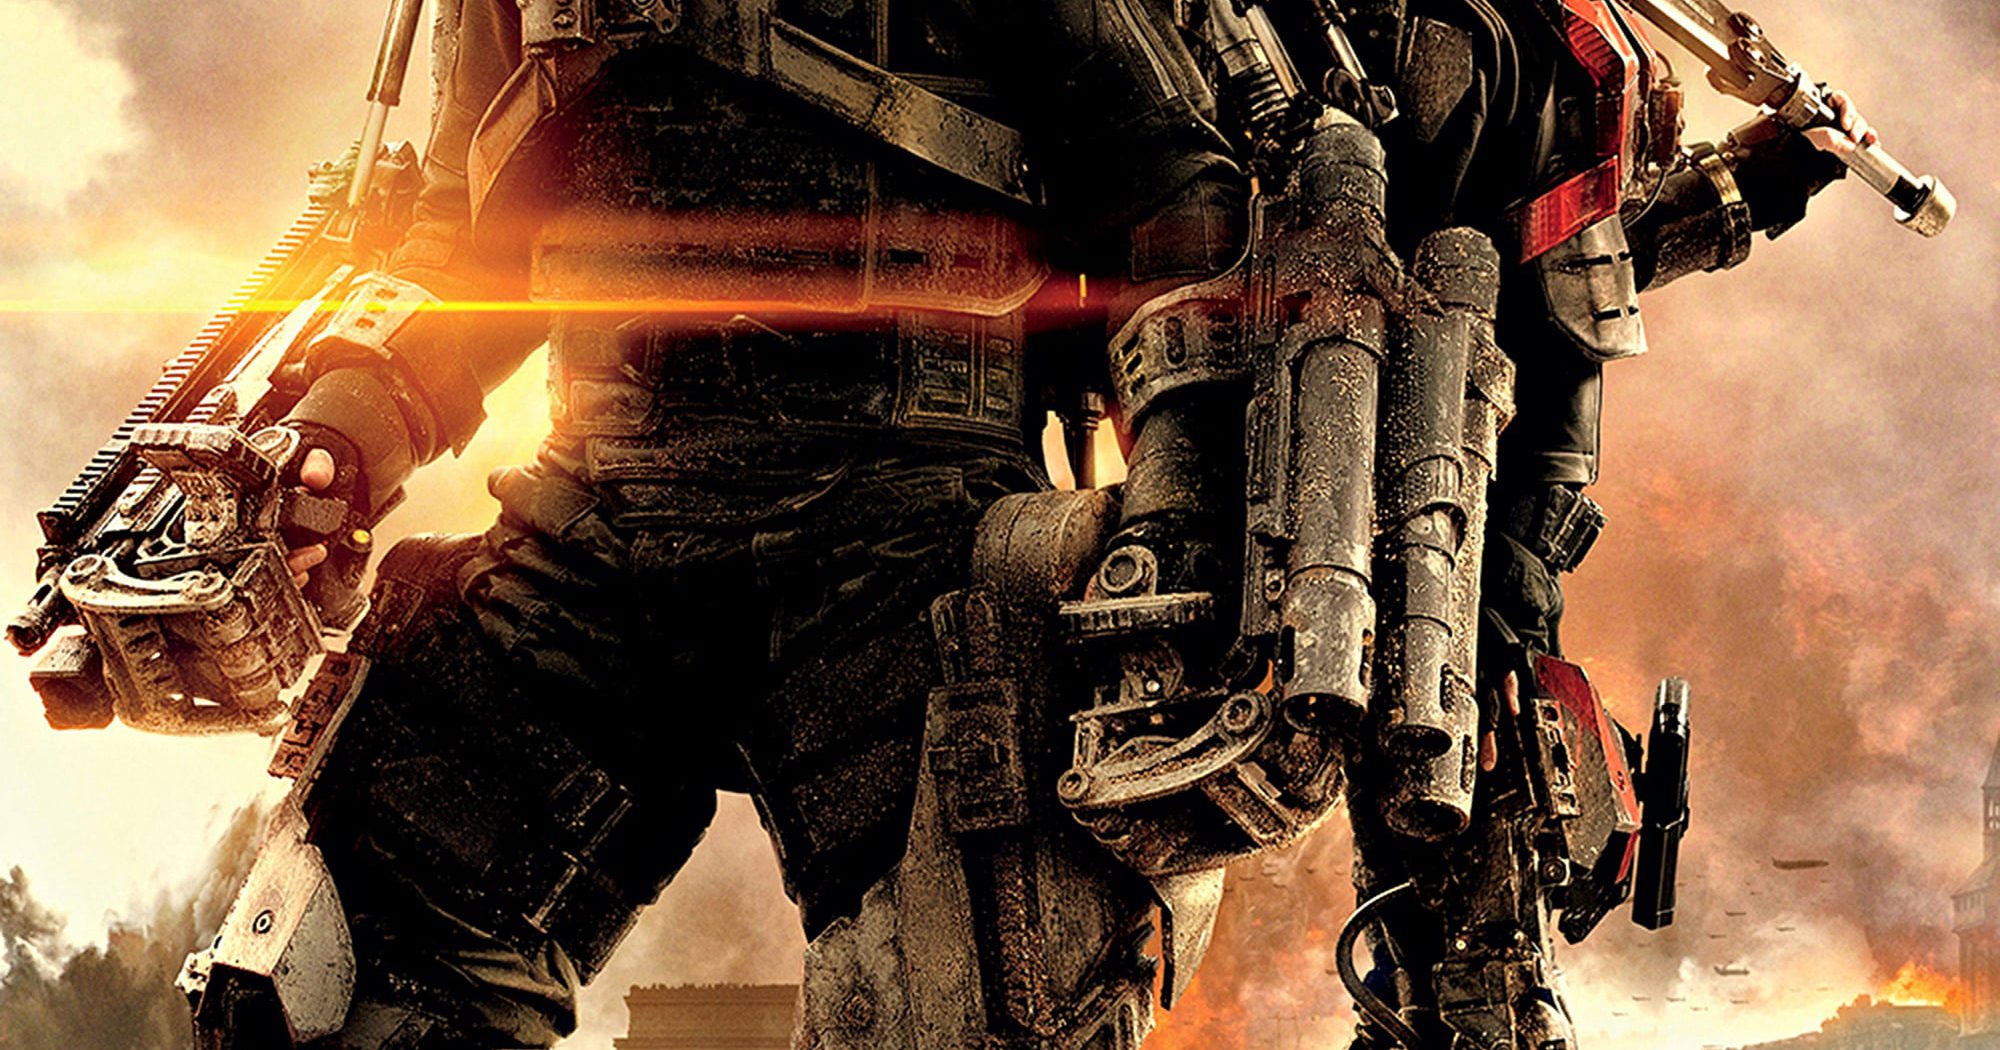 Poster for the movie "Edge of Tomorrow"